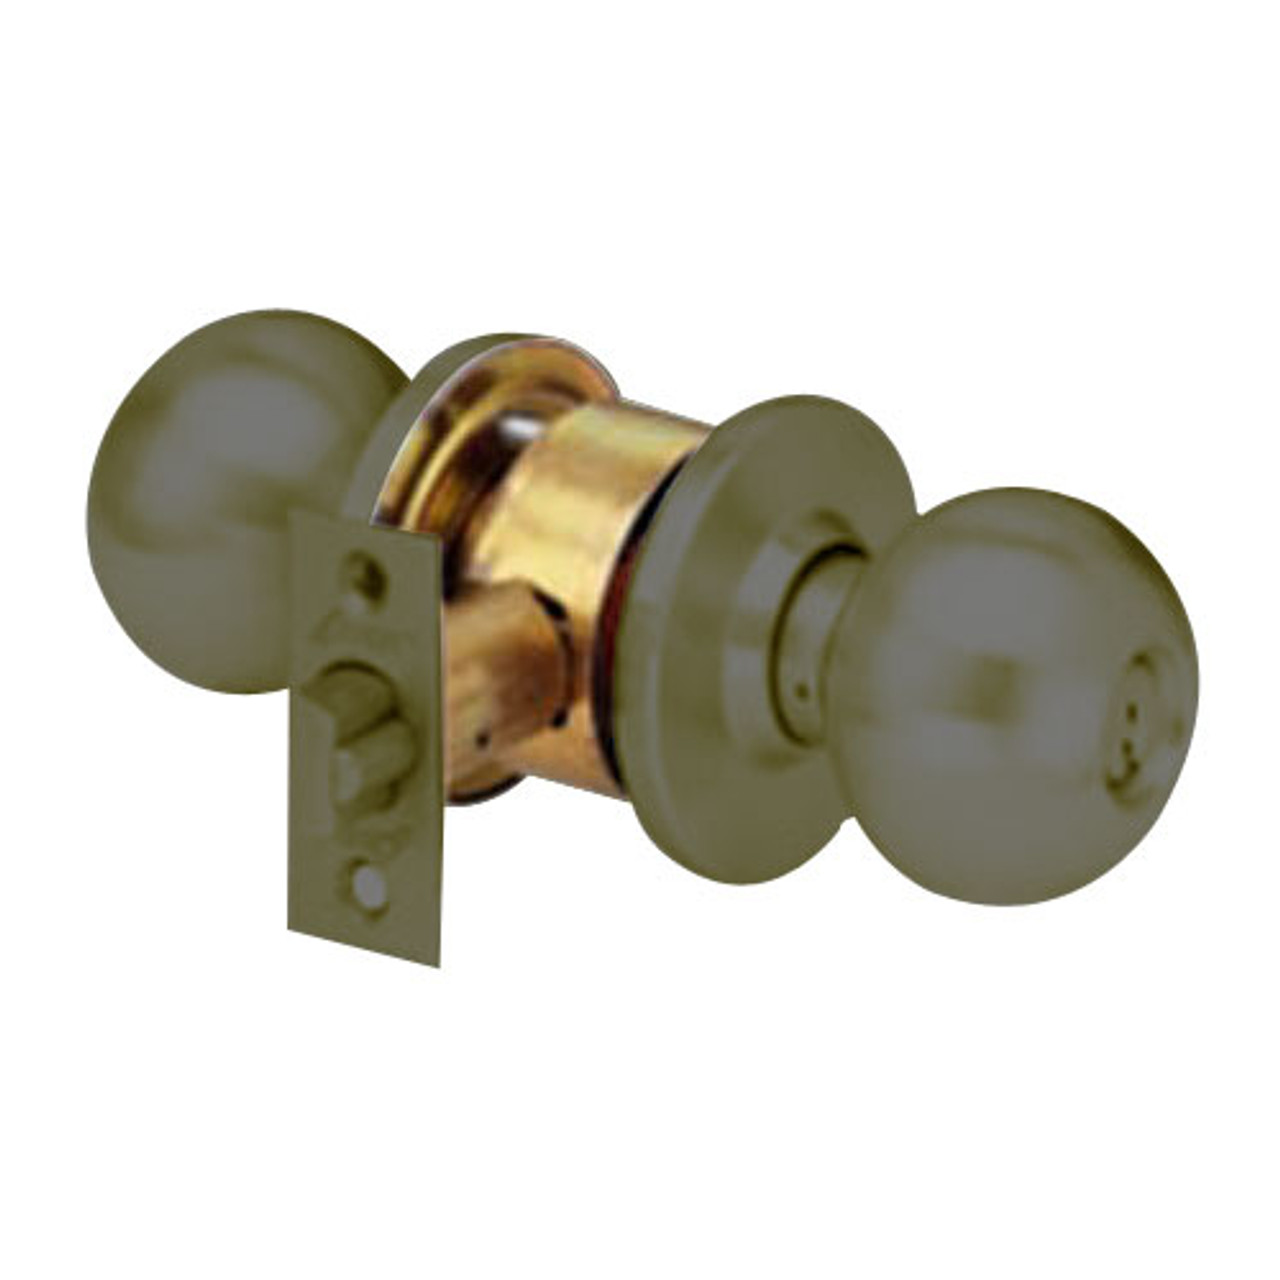 MK14-TA-10B Arrow Lock MK Series Cylindrical Locksets Single Cylinder for Service Station with TA Knob in Oil Rubbed Bronze Finish